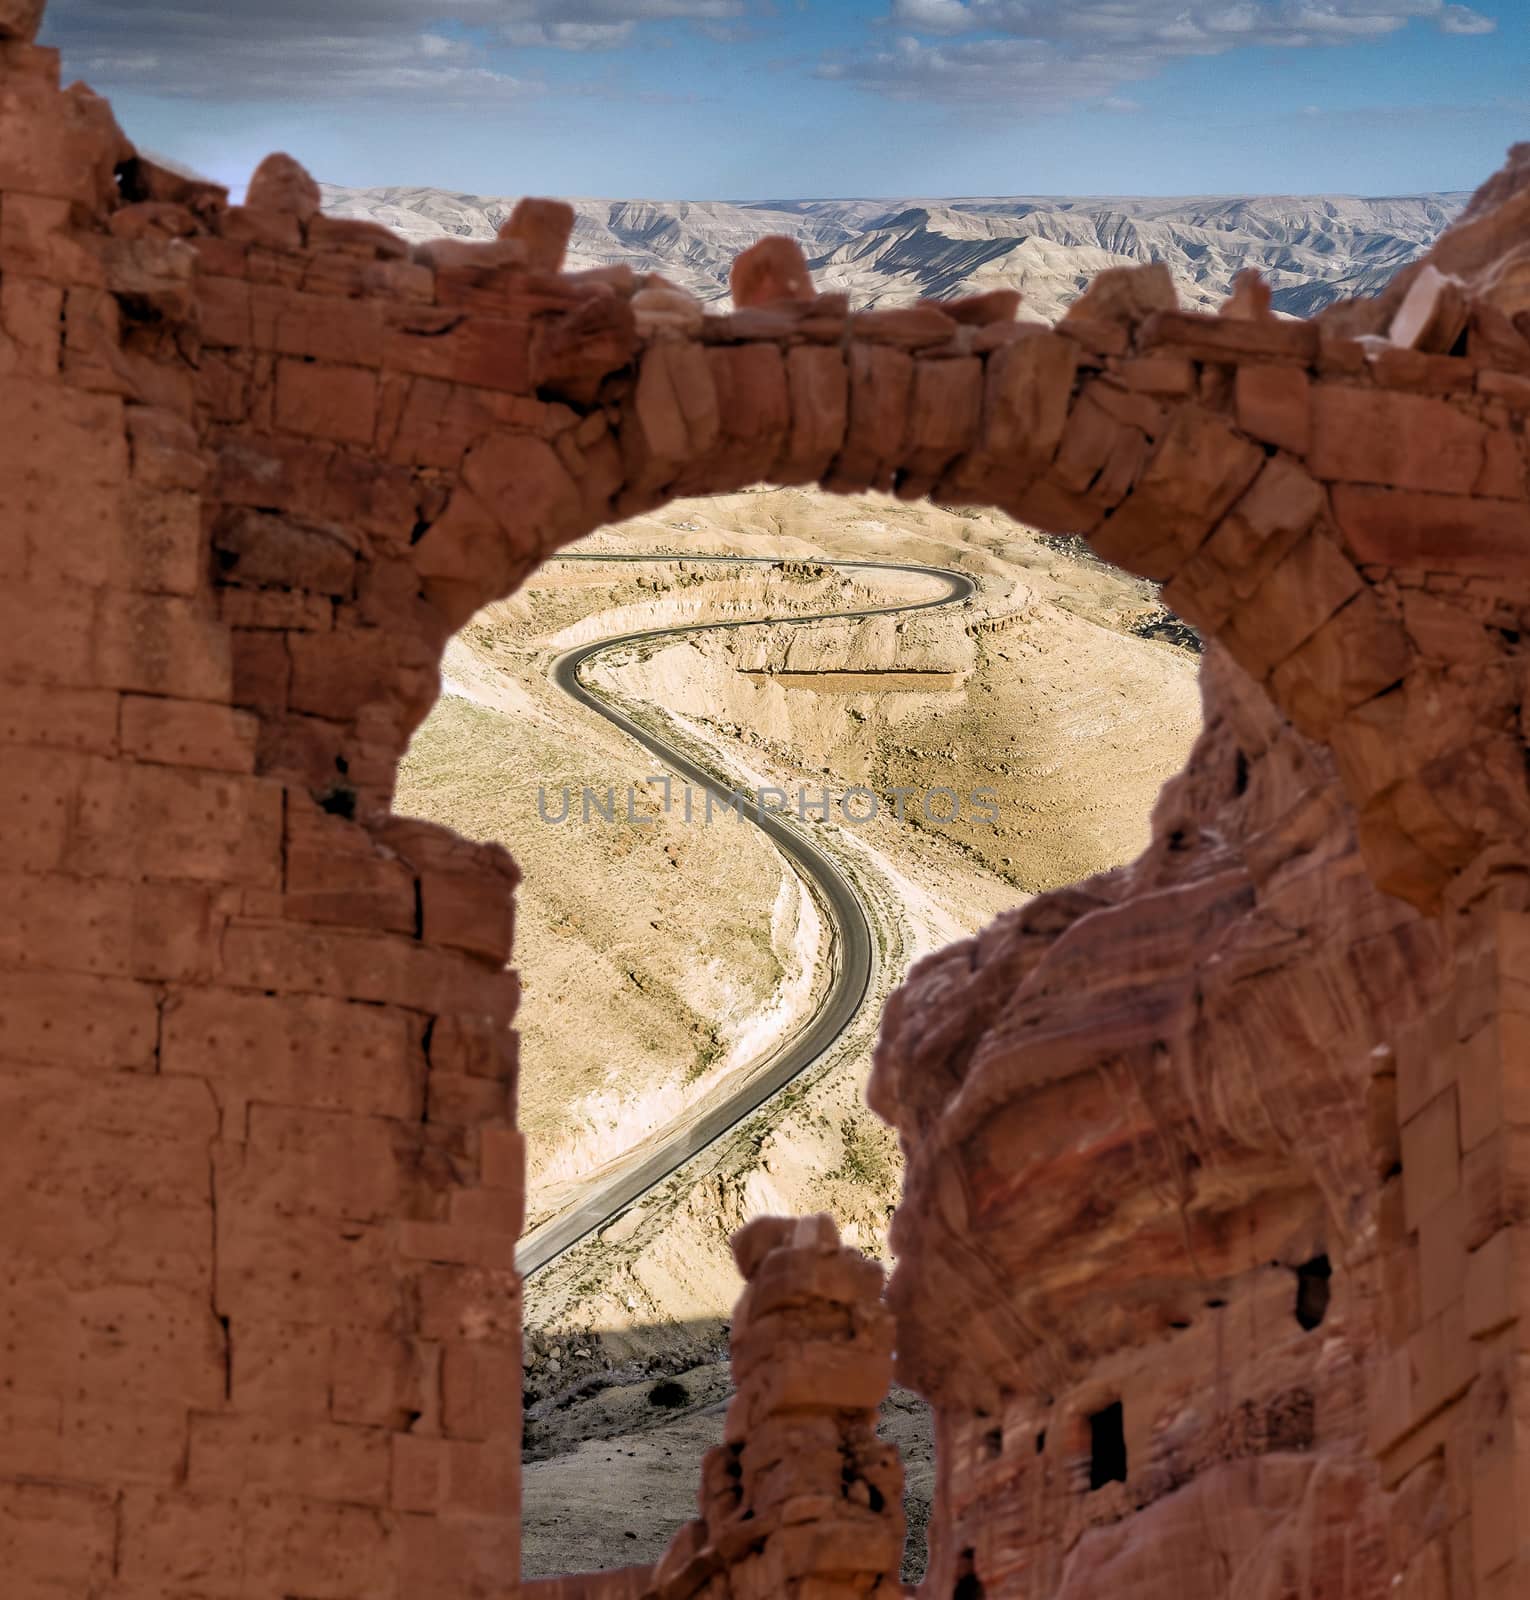 View through a ruin to a steep road with serpentines in the highlands of Jordan by geogif